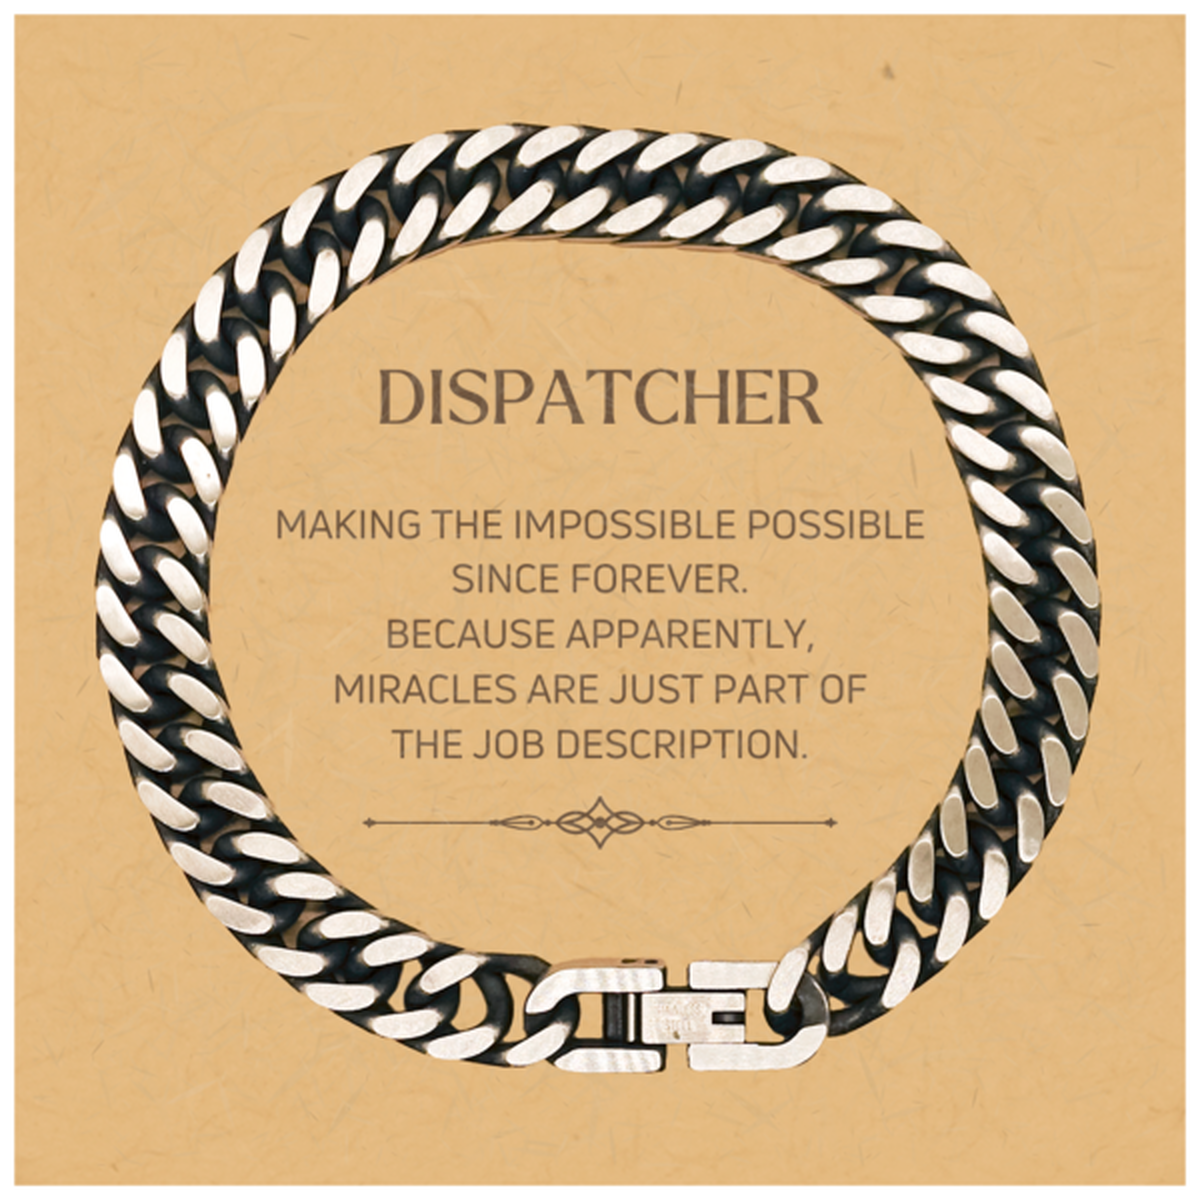 Funny Dispatcher Gifts, Miracles are just part of the job description, Inspirational Birthday Christmas Cuban Link Chain Bracelet For Dispatcher, Men, Women, Coworkers, Friends, Boss